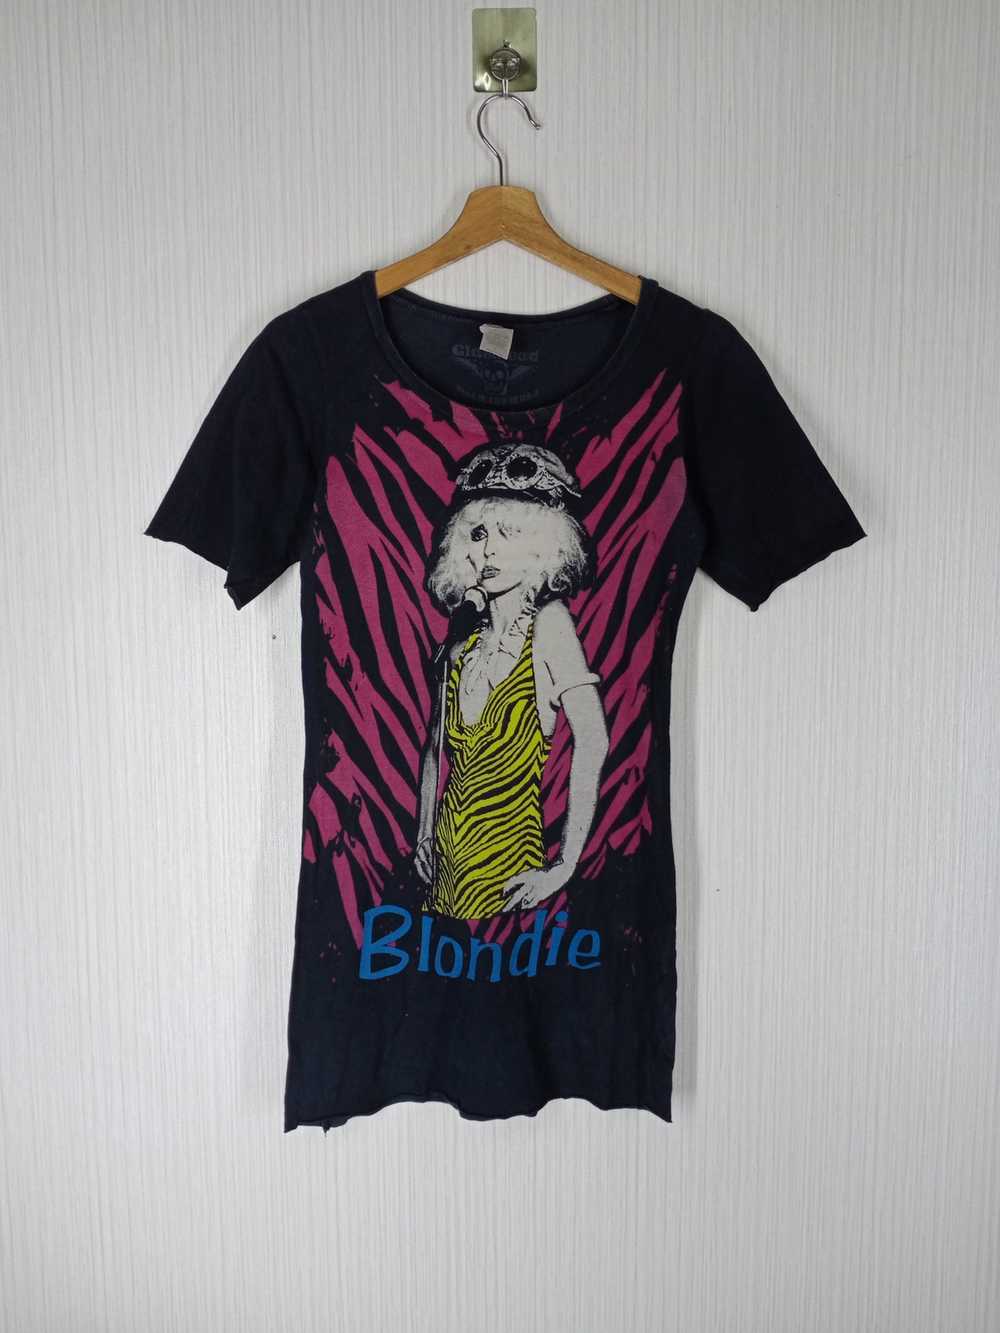 Band Tees × Rare × Vintage Rare Blondie Graphic T… - image 1